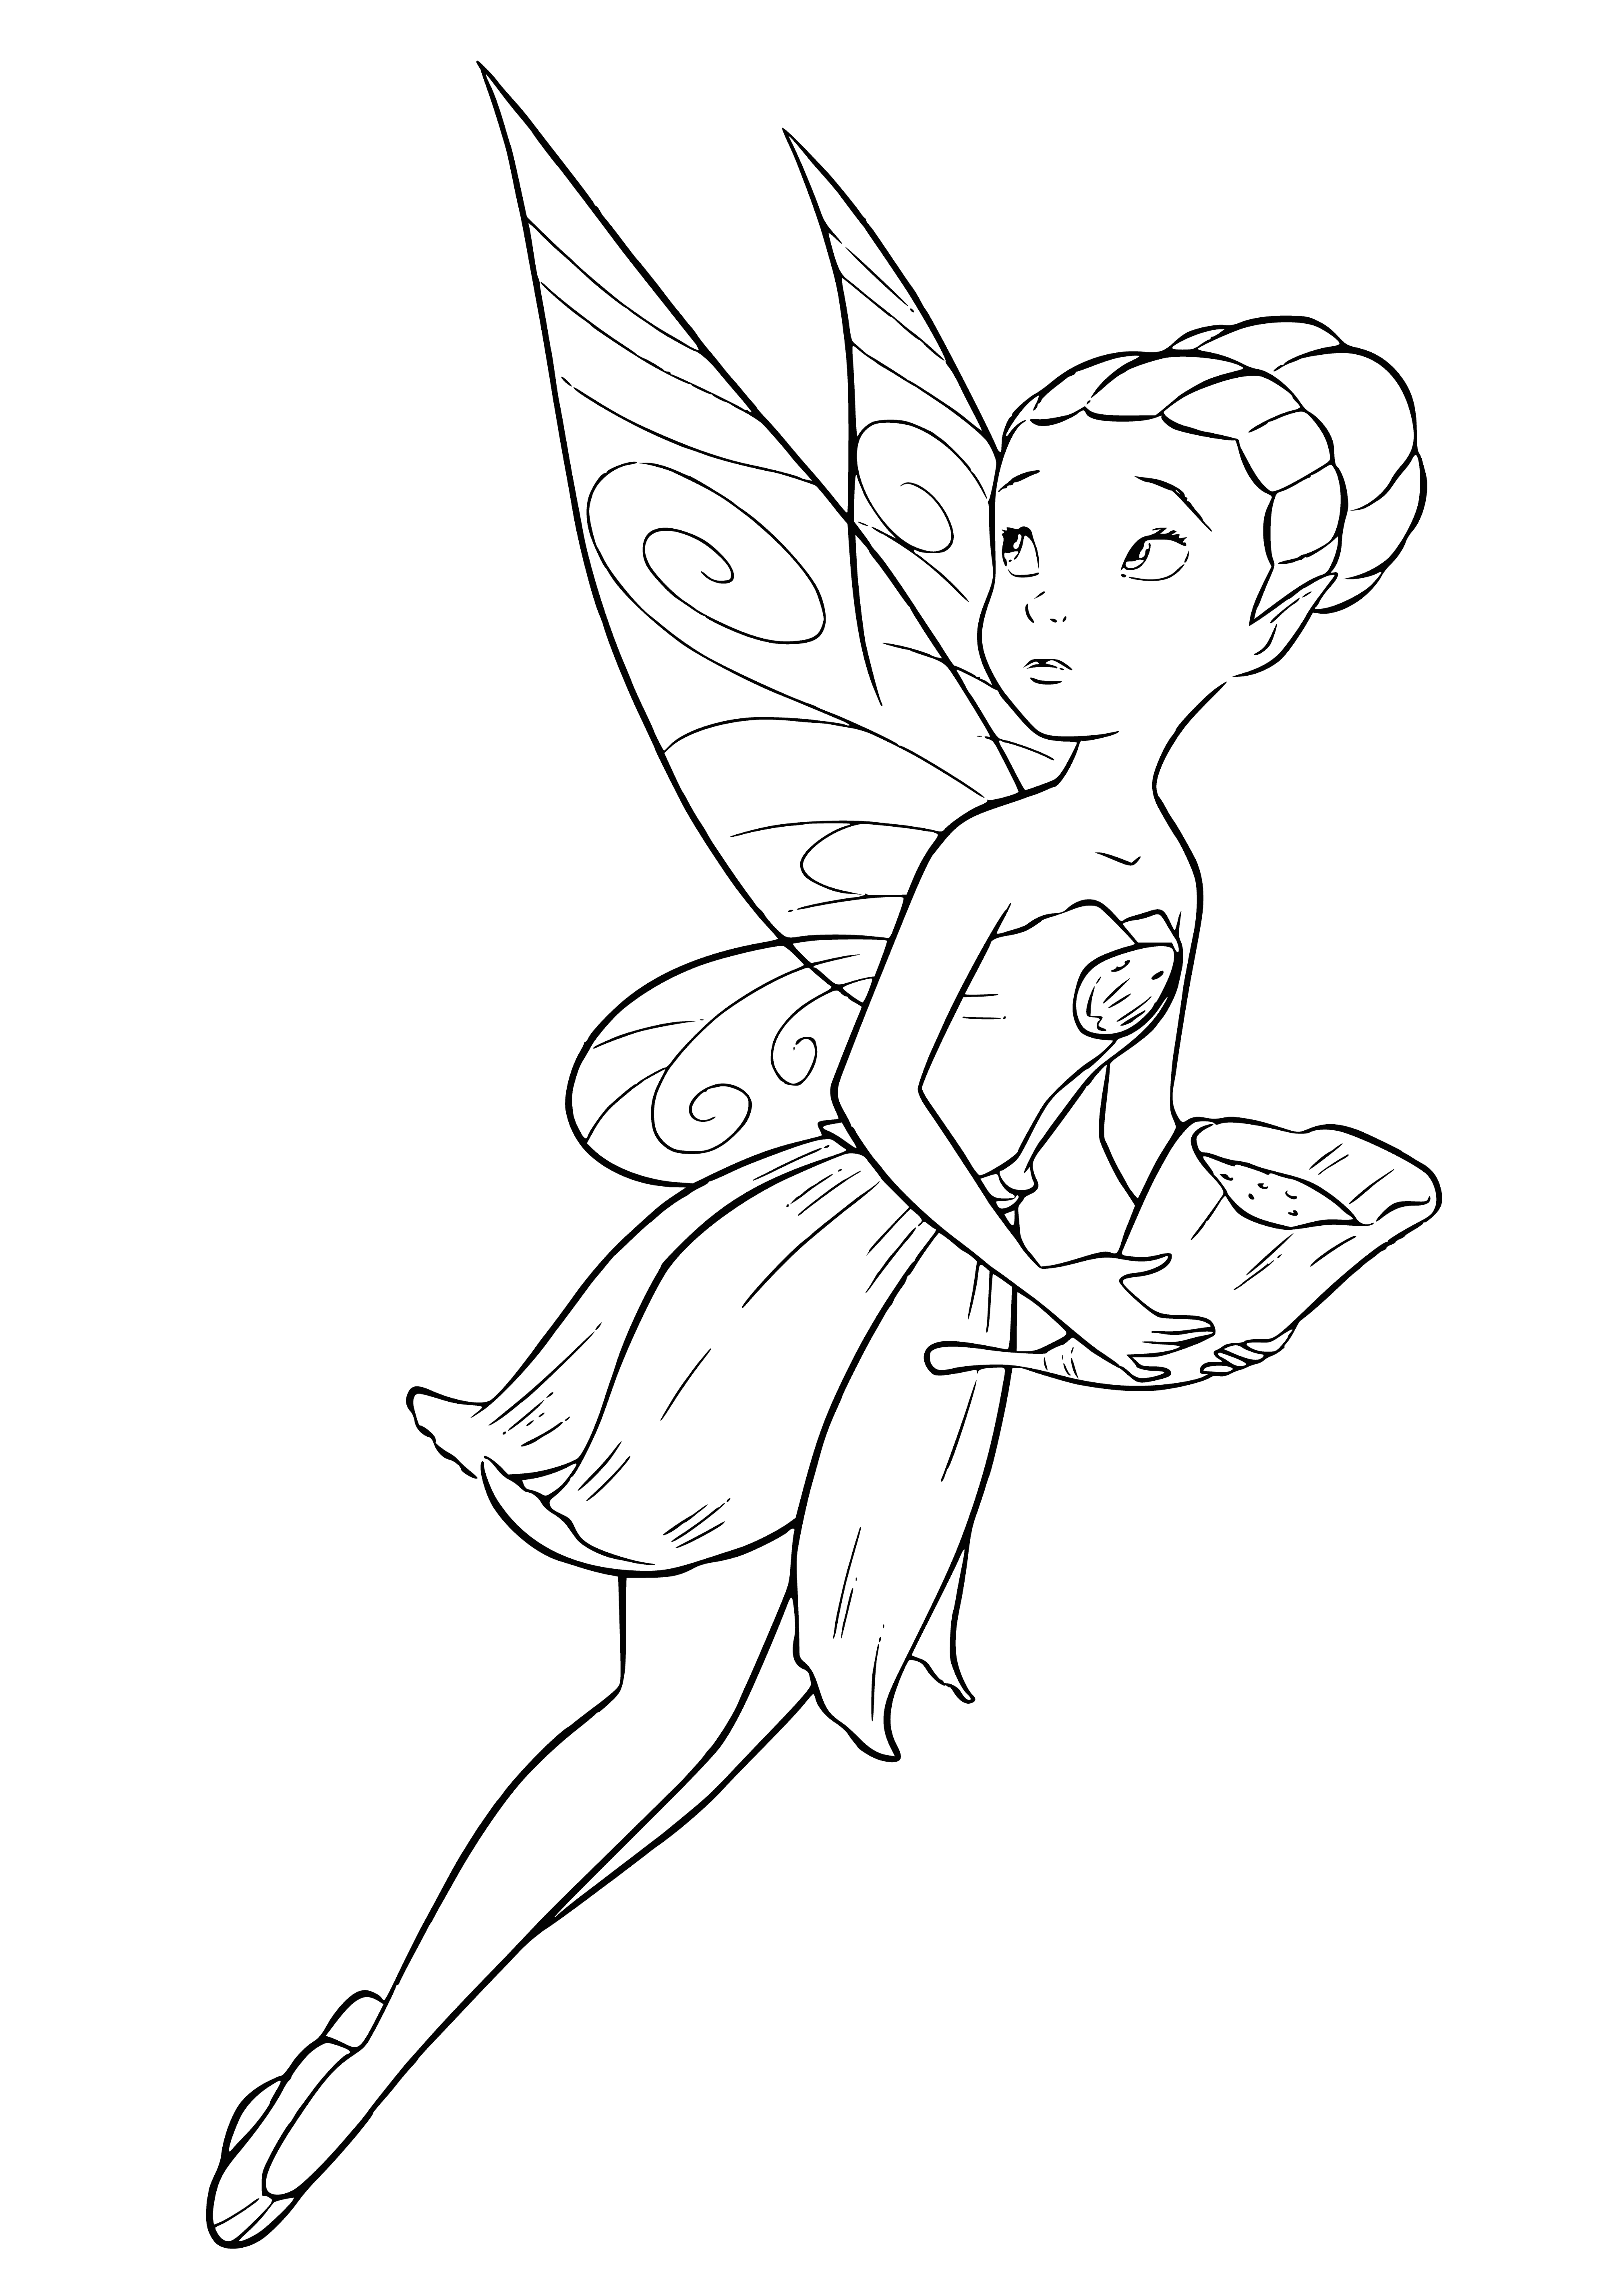 coloring page: Peaceful beast glowing with mysterious light as a small, winged creature tend to it.